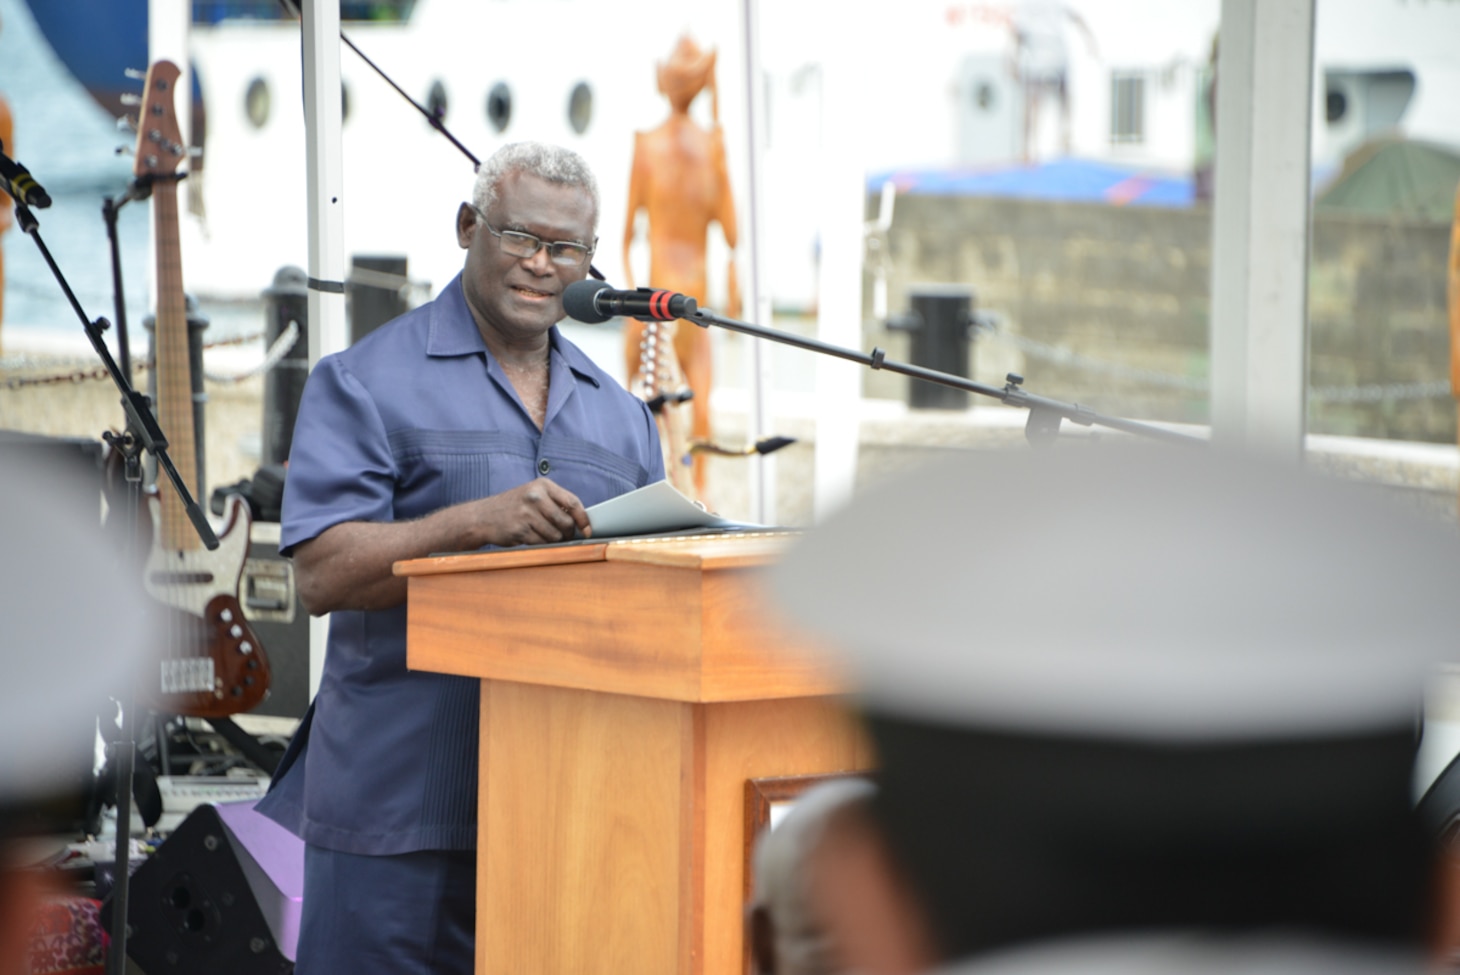 SOLOMON ISLANDS (Aug. 29, 2022) Solomon Islands Prime Minister Manasseh Sogavare addresses the crowd during a public ceremony in Unity Square in the heart of Honiara in support of Pacific Partnership 2022. Now in its 17th year, Pacific Partnership is the largest annual multinational humanitarian assistance and disaster relief preparedness mission conducted in the Indo-Pacific. Pacific Partnership is a unifying mission that fosters enduring friendship and cooperation among many nations. This year’s mission in Solomon Islands will include participants from the United States, Japan and Australia. (Courtesy photo by Japan Maritime Self-Defense Force Sfc. Toshihiro Mizuochi)